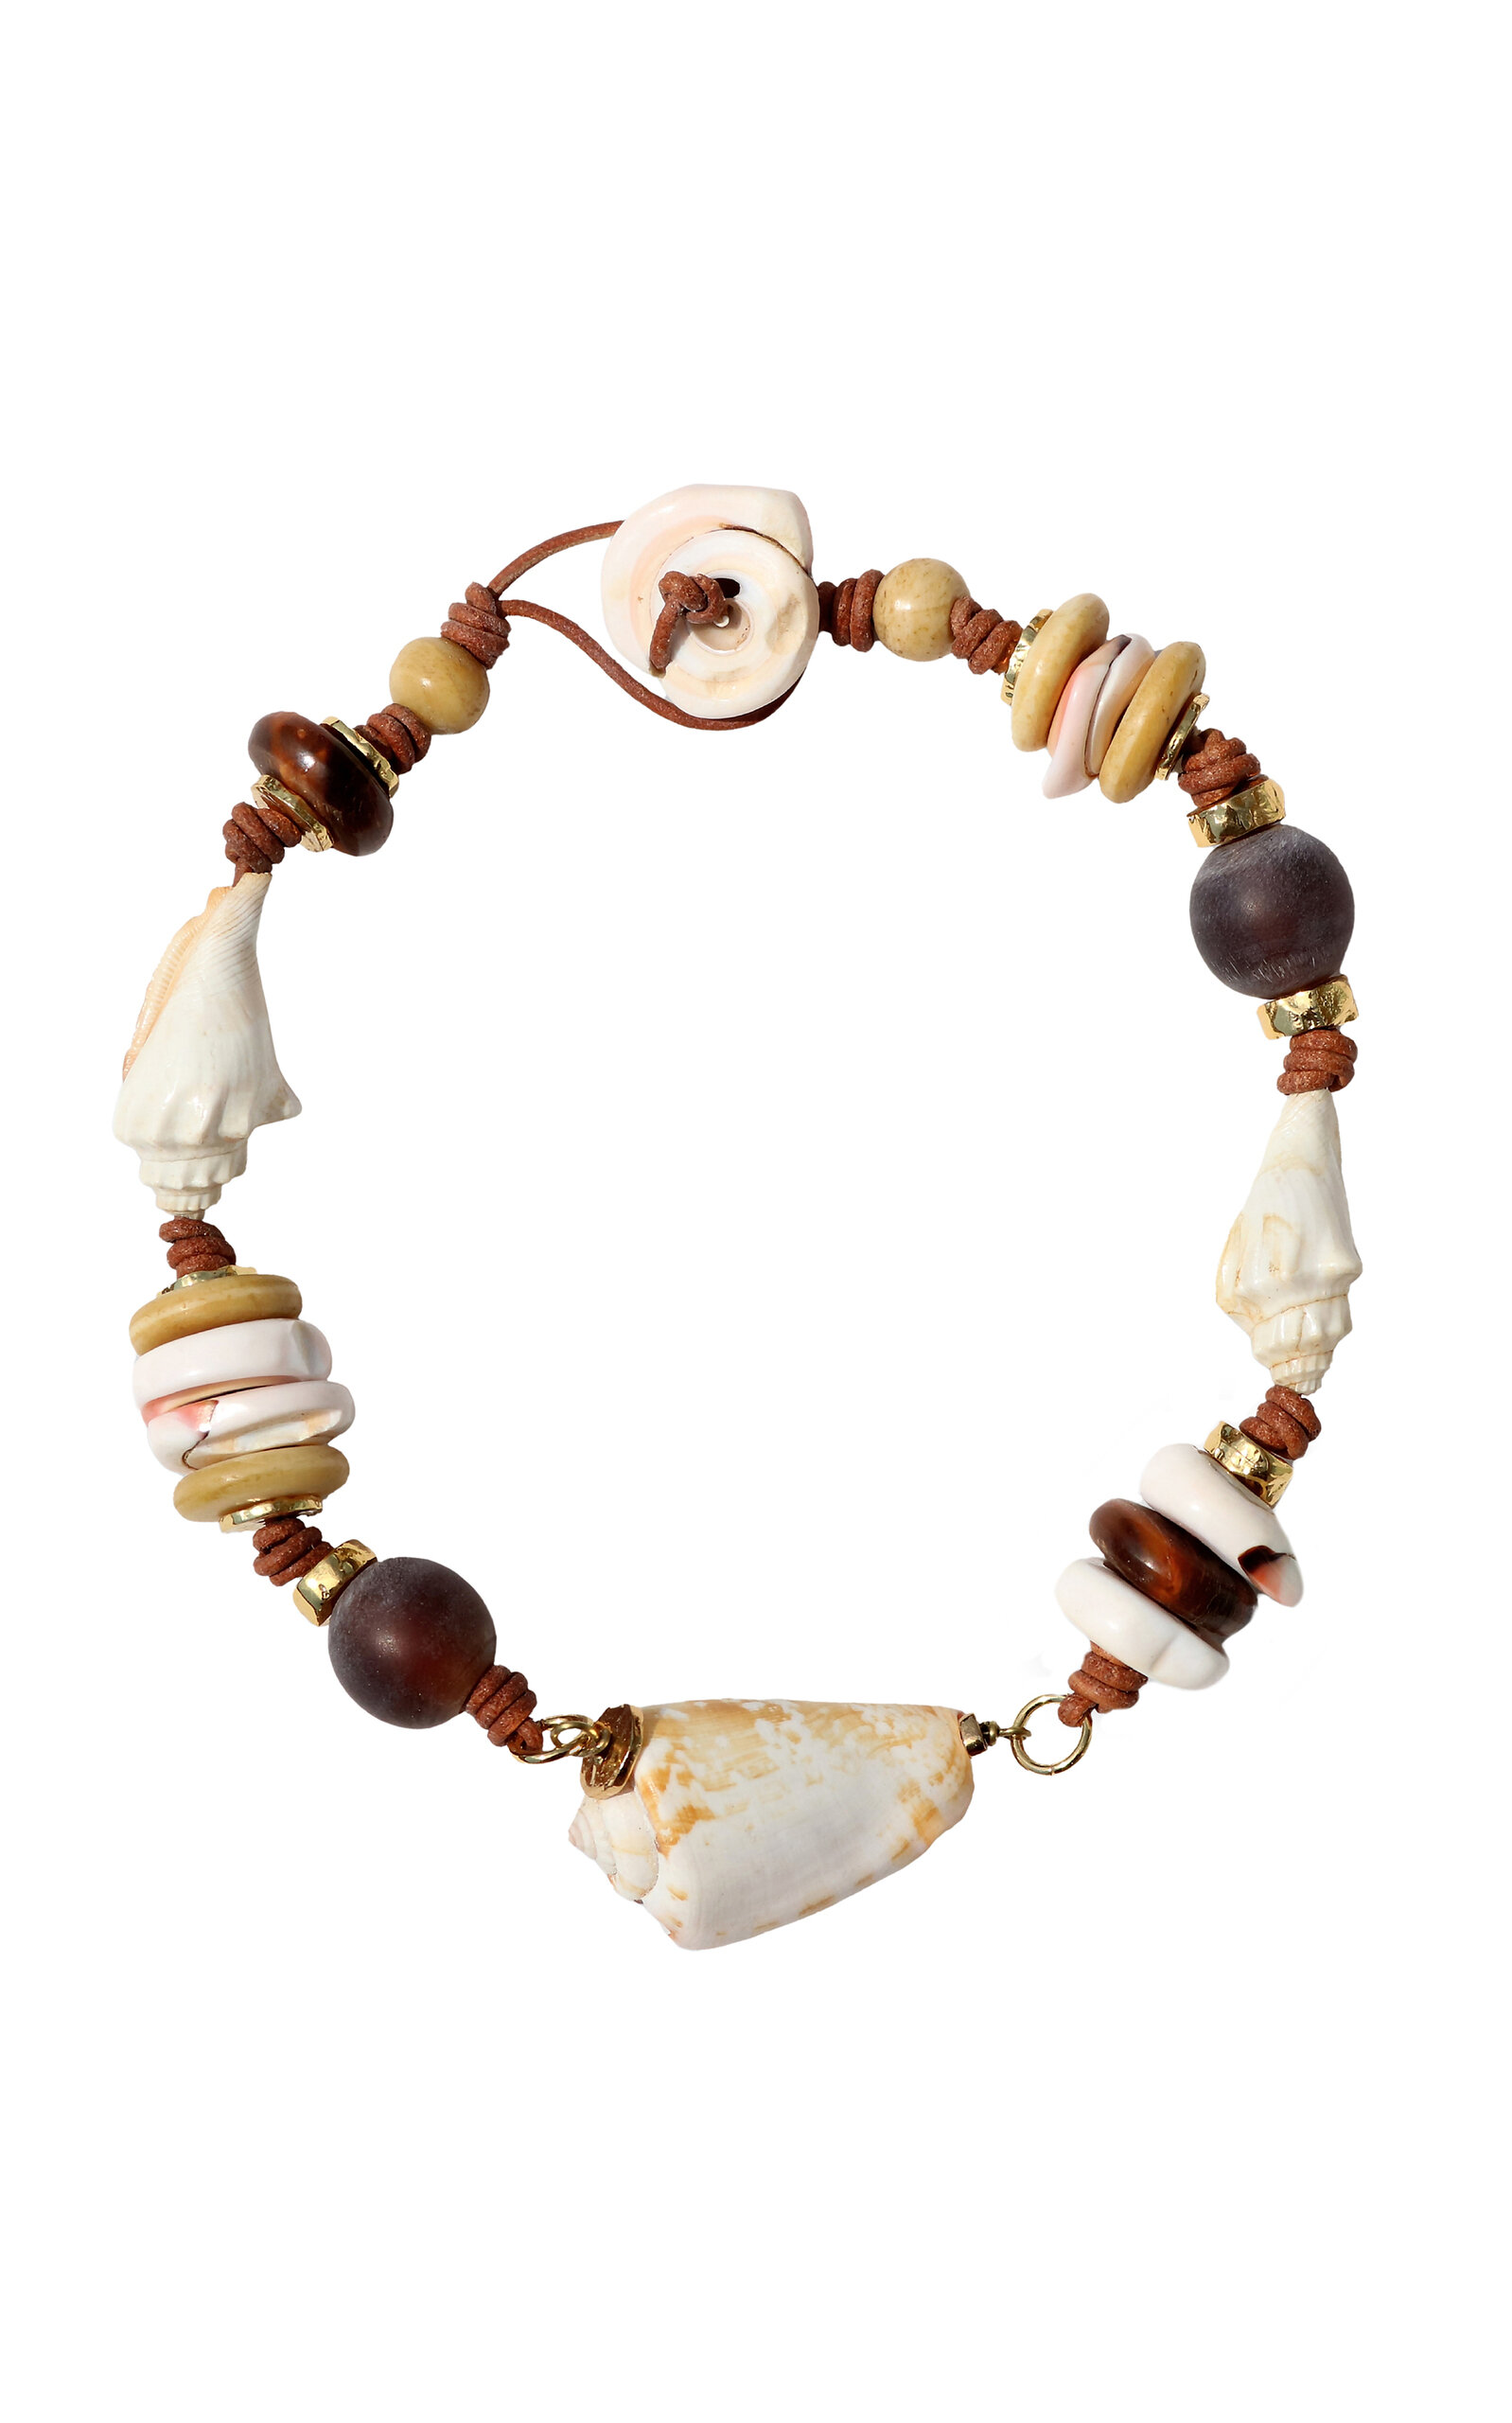 Samsara Vintage Beads and Shell Necklace